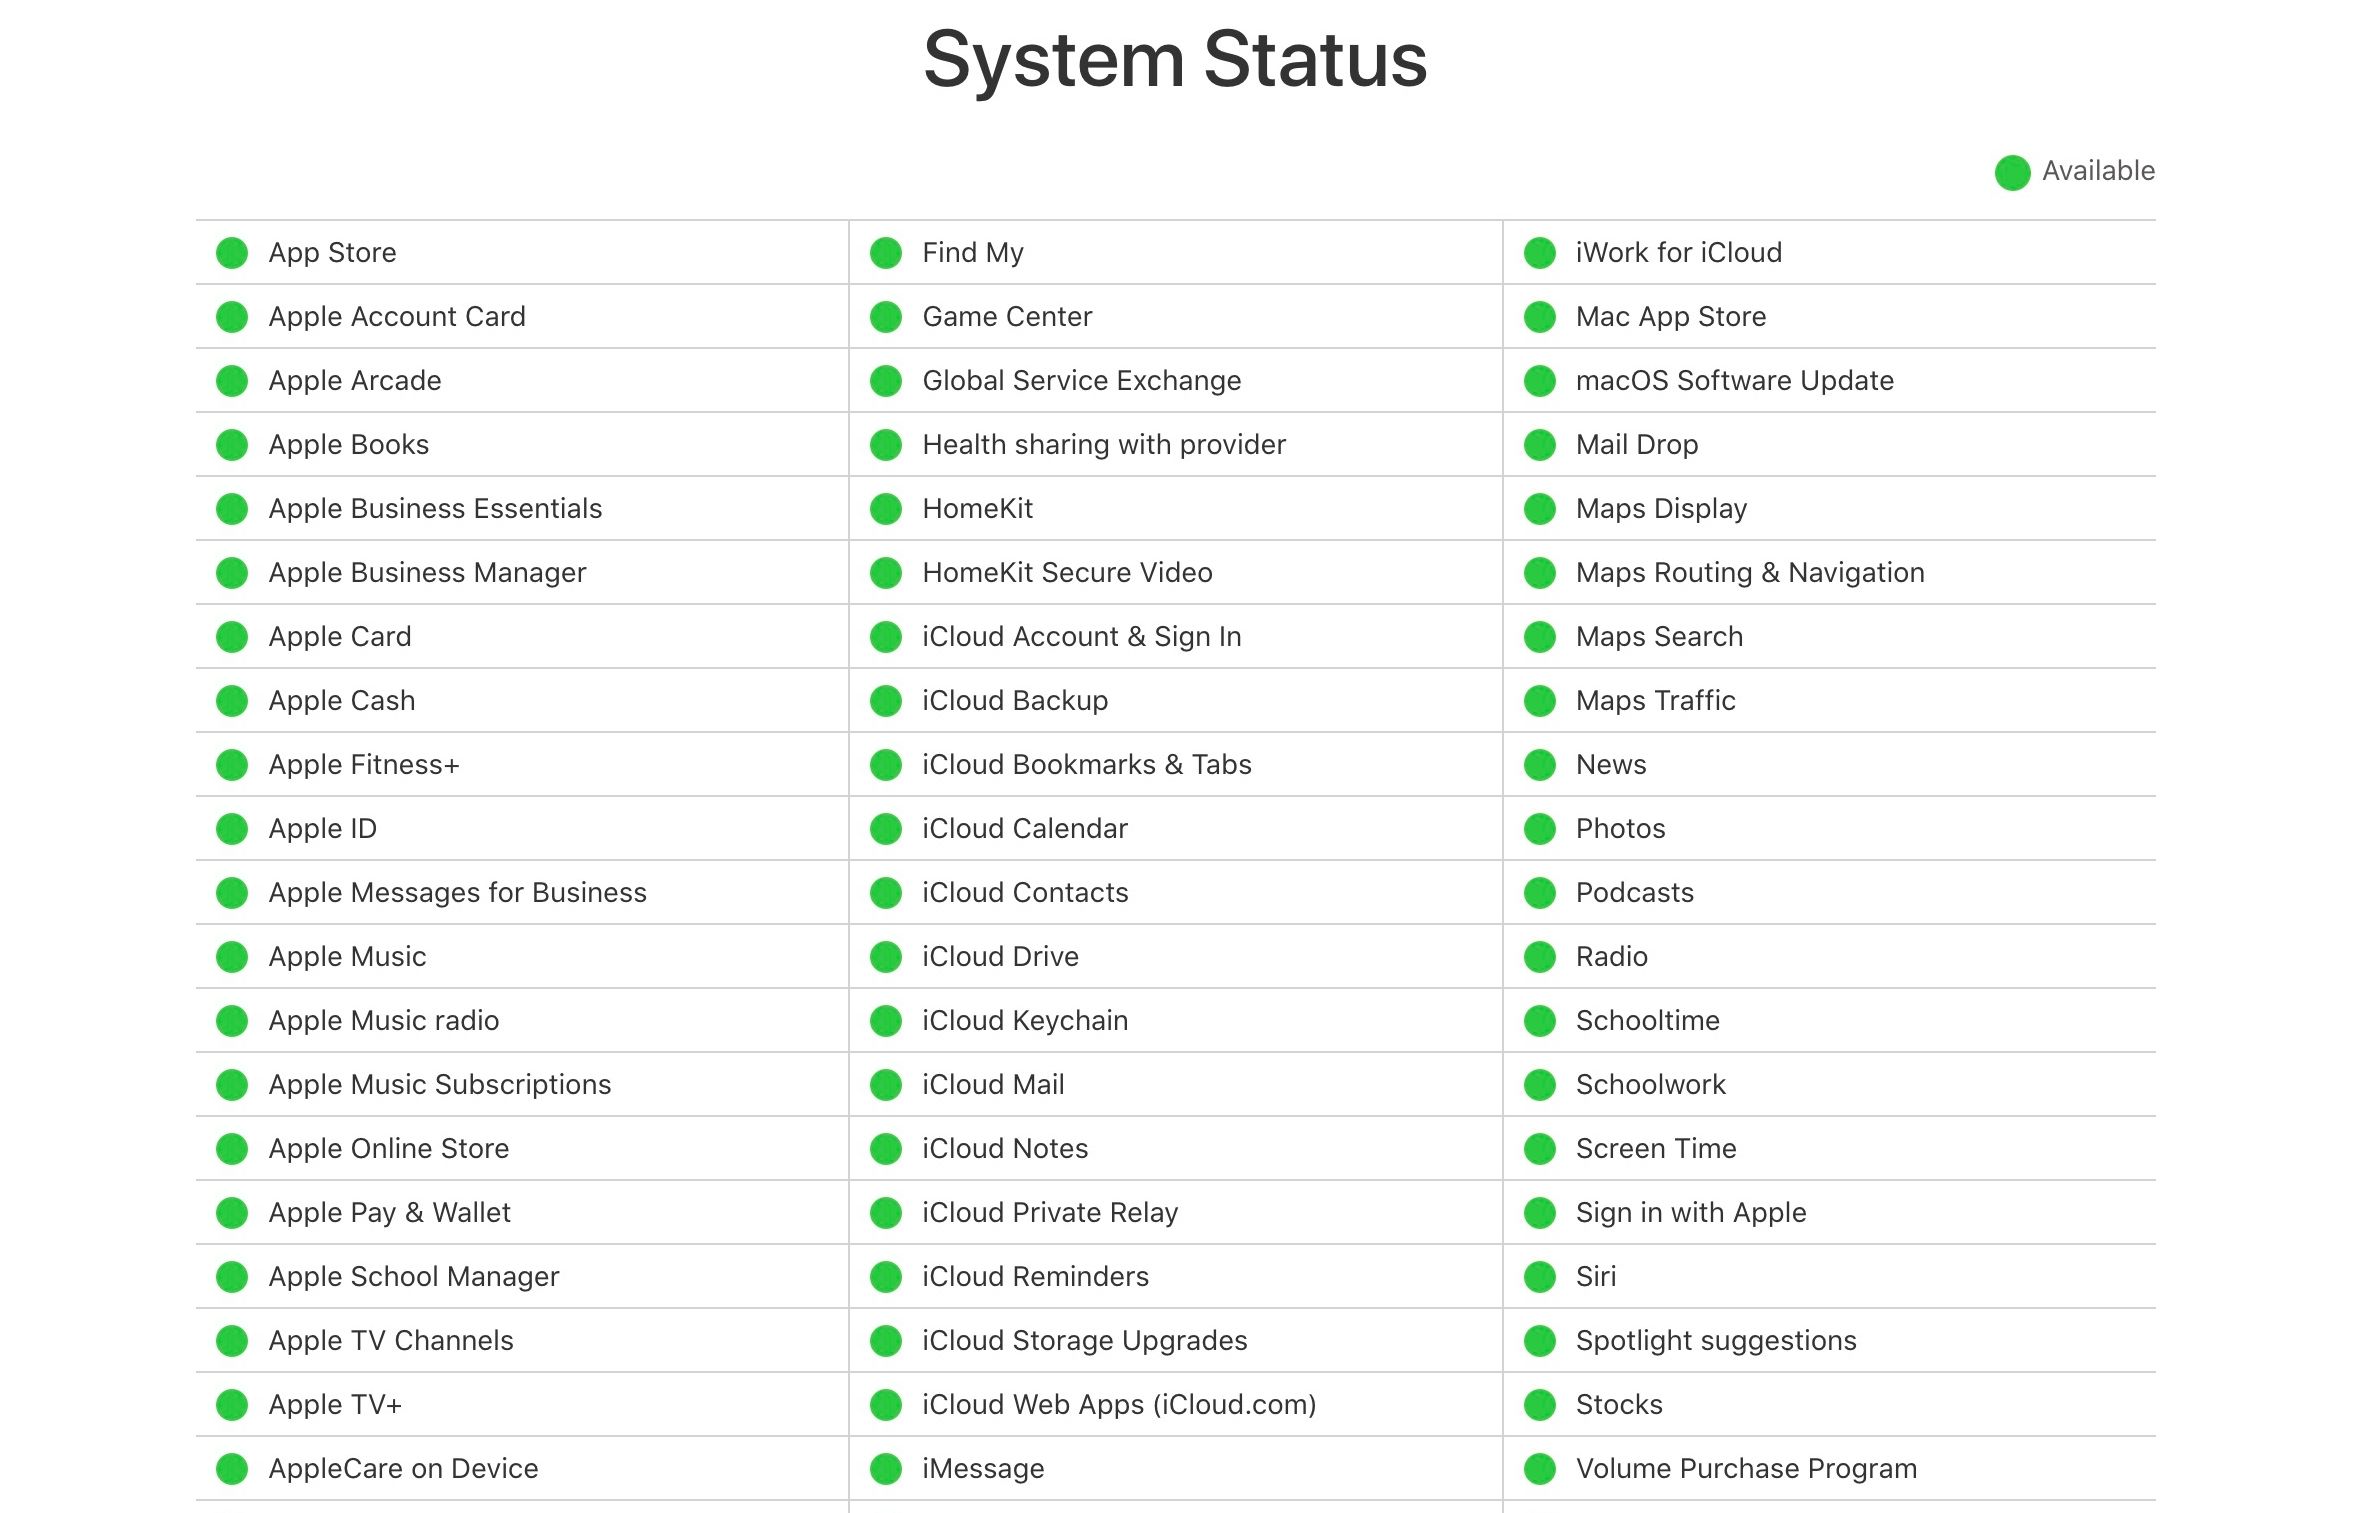 Screenshot of Apple's System Status page